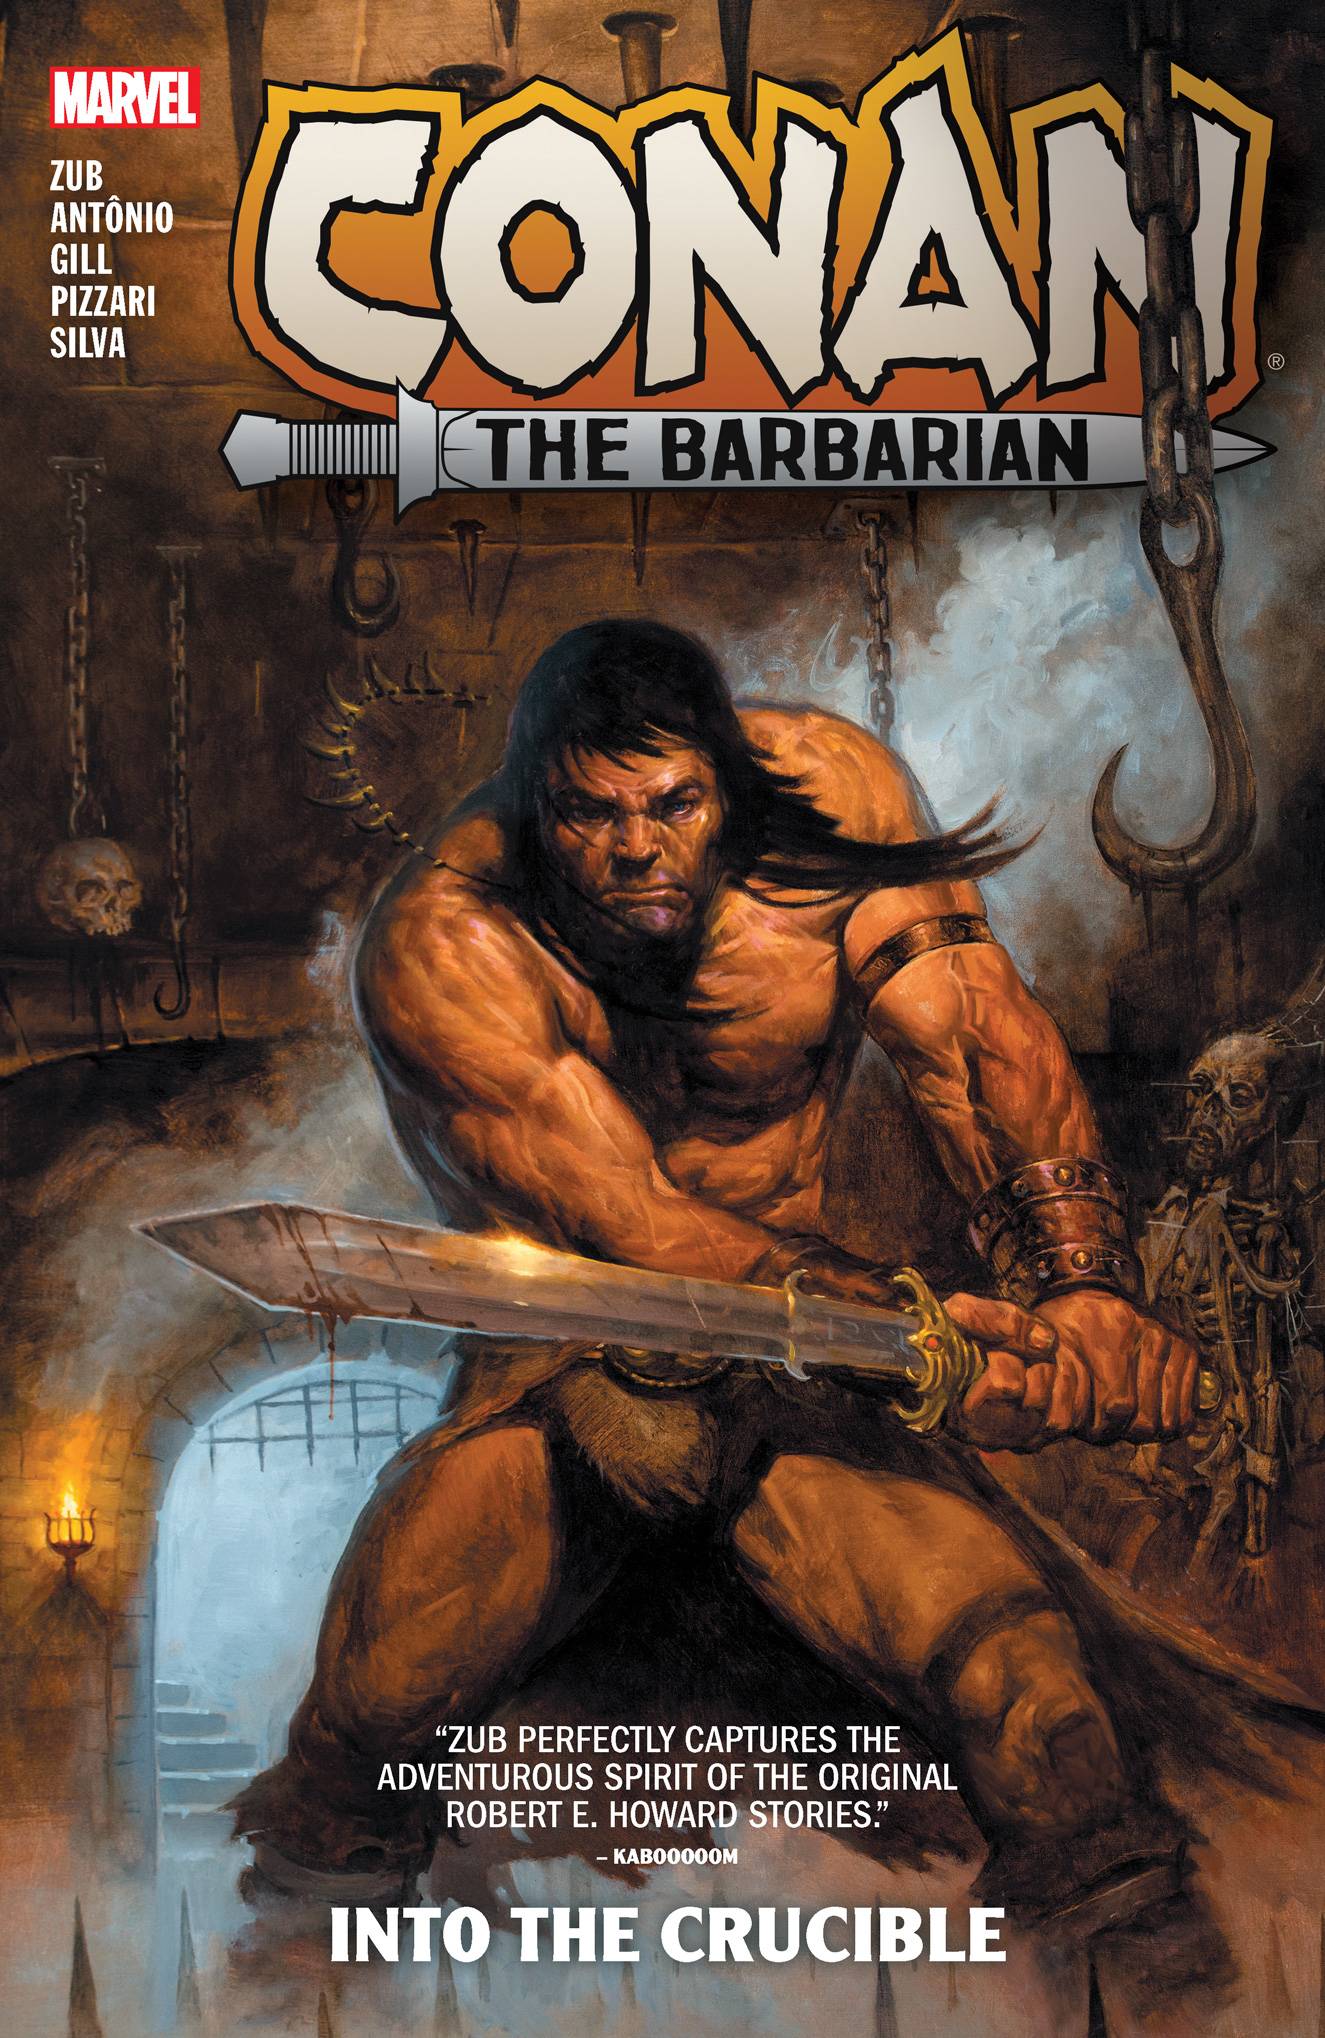 Conan The Barbarian (2019) by Jim Zub Volume 1: Into The Crucible